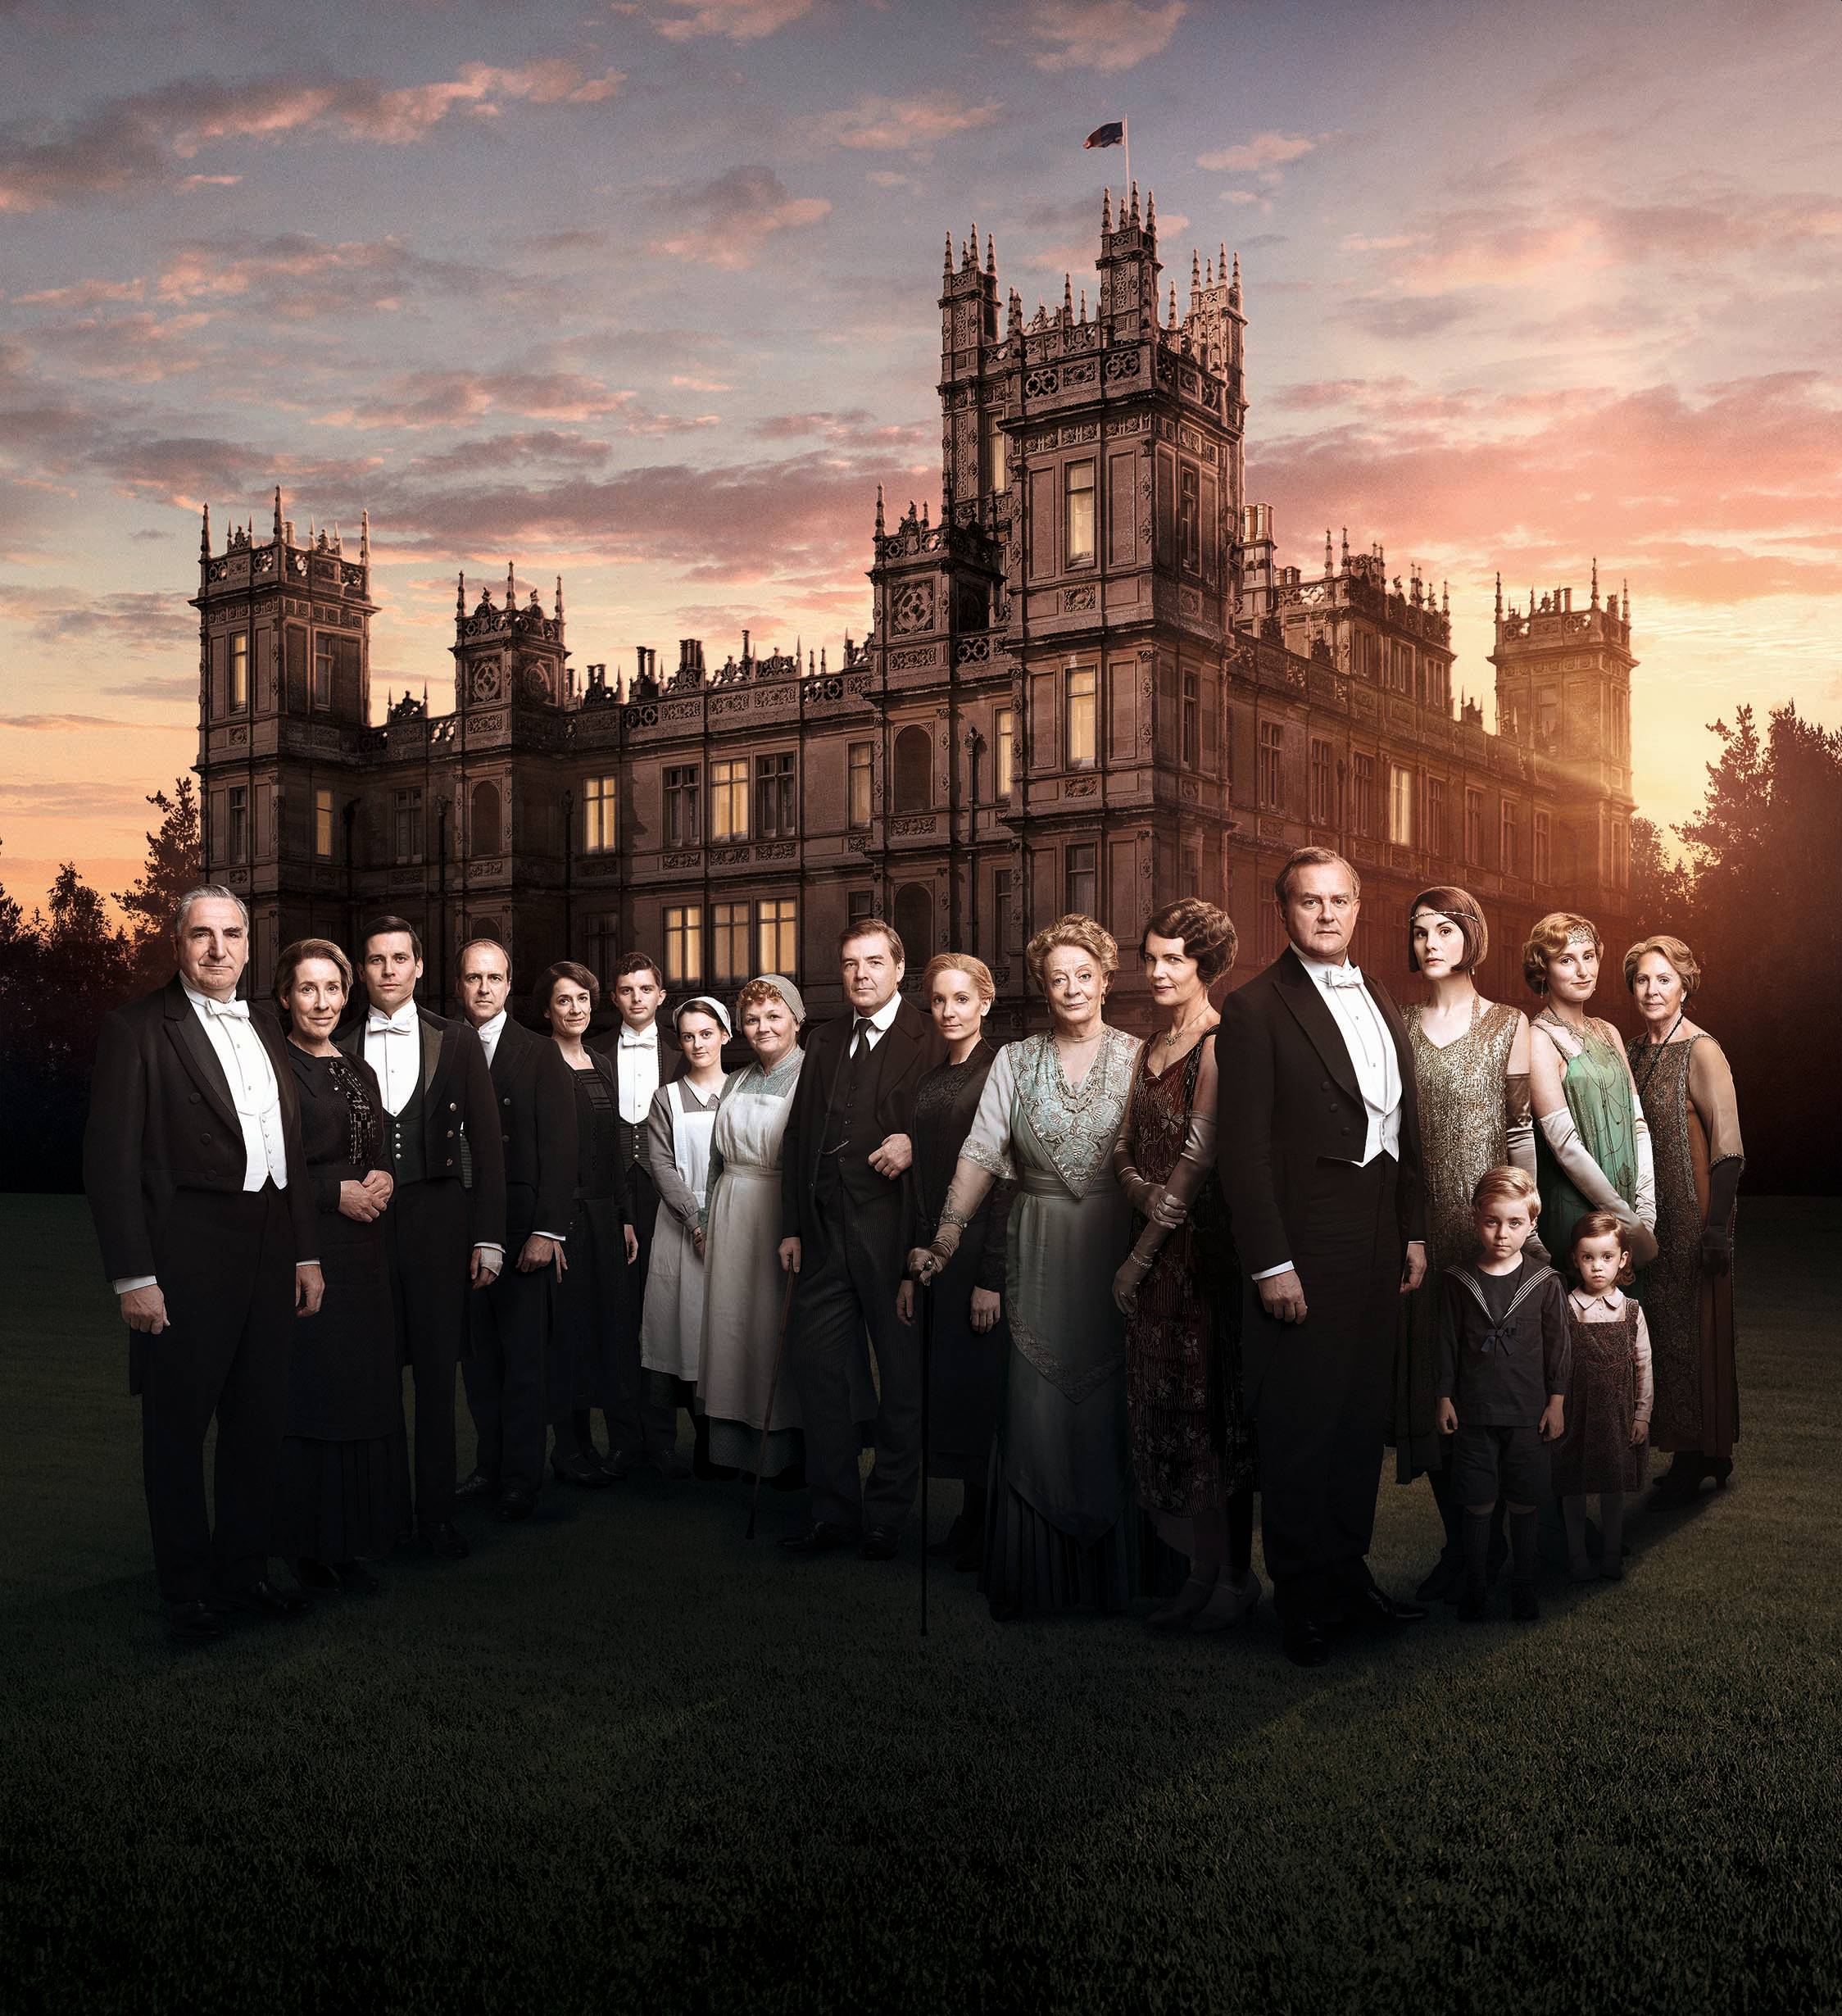 WILL offering free Downton Abbey screening at The Virginia